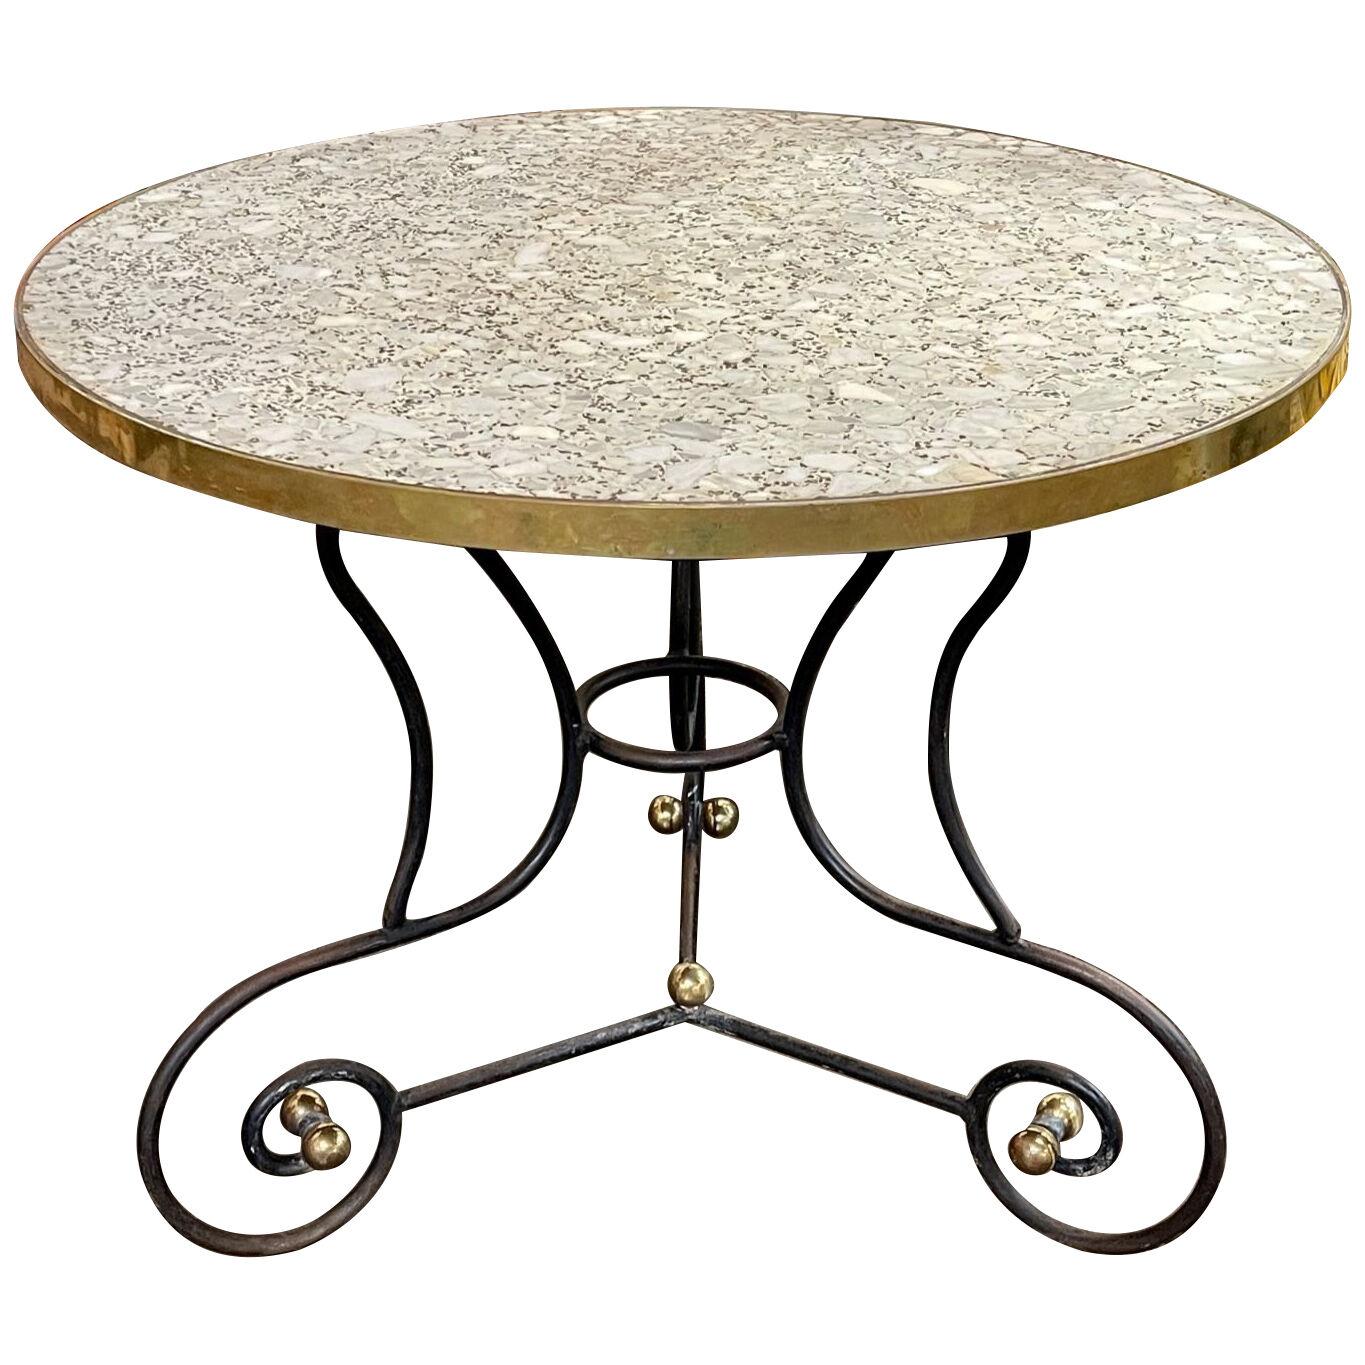 Vintage French Steel and Brass Bistro Table with Granite Top